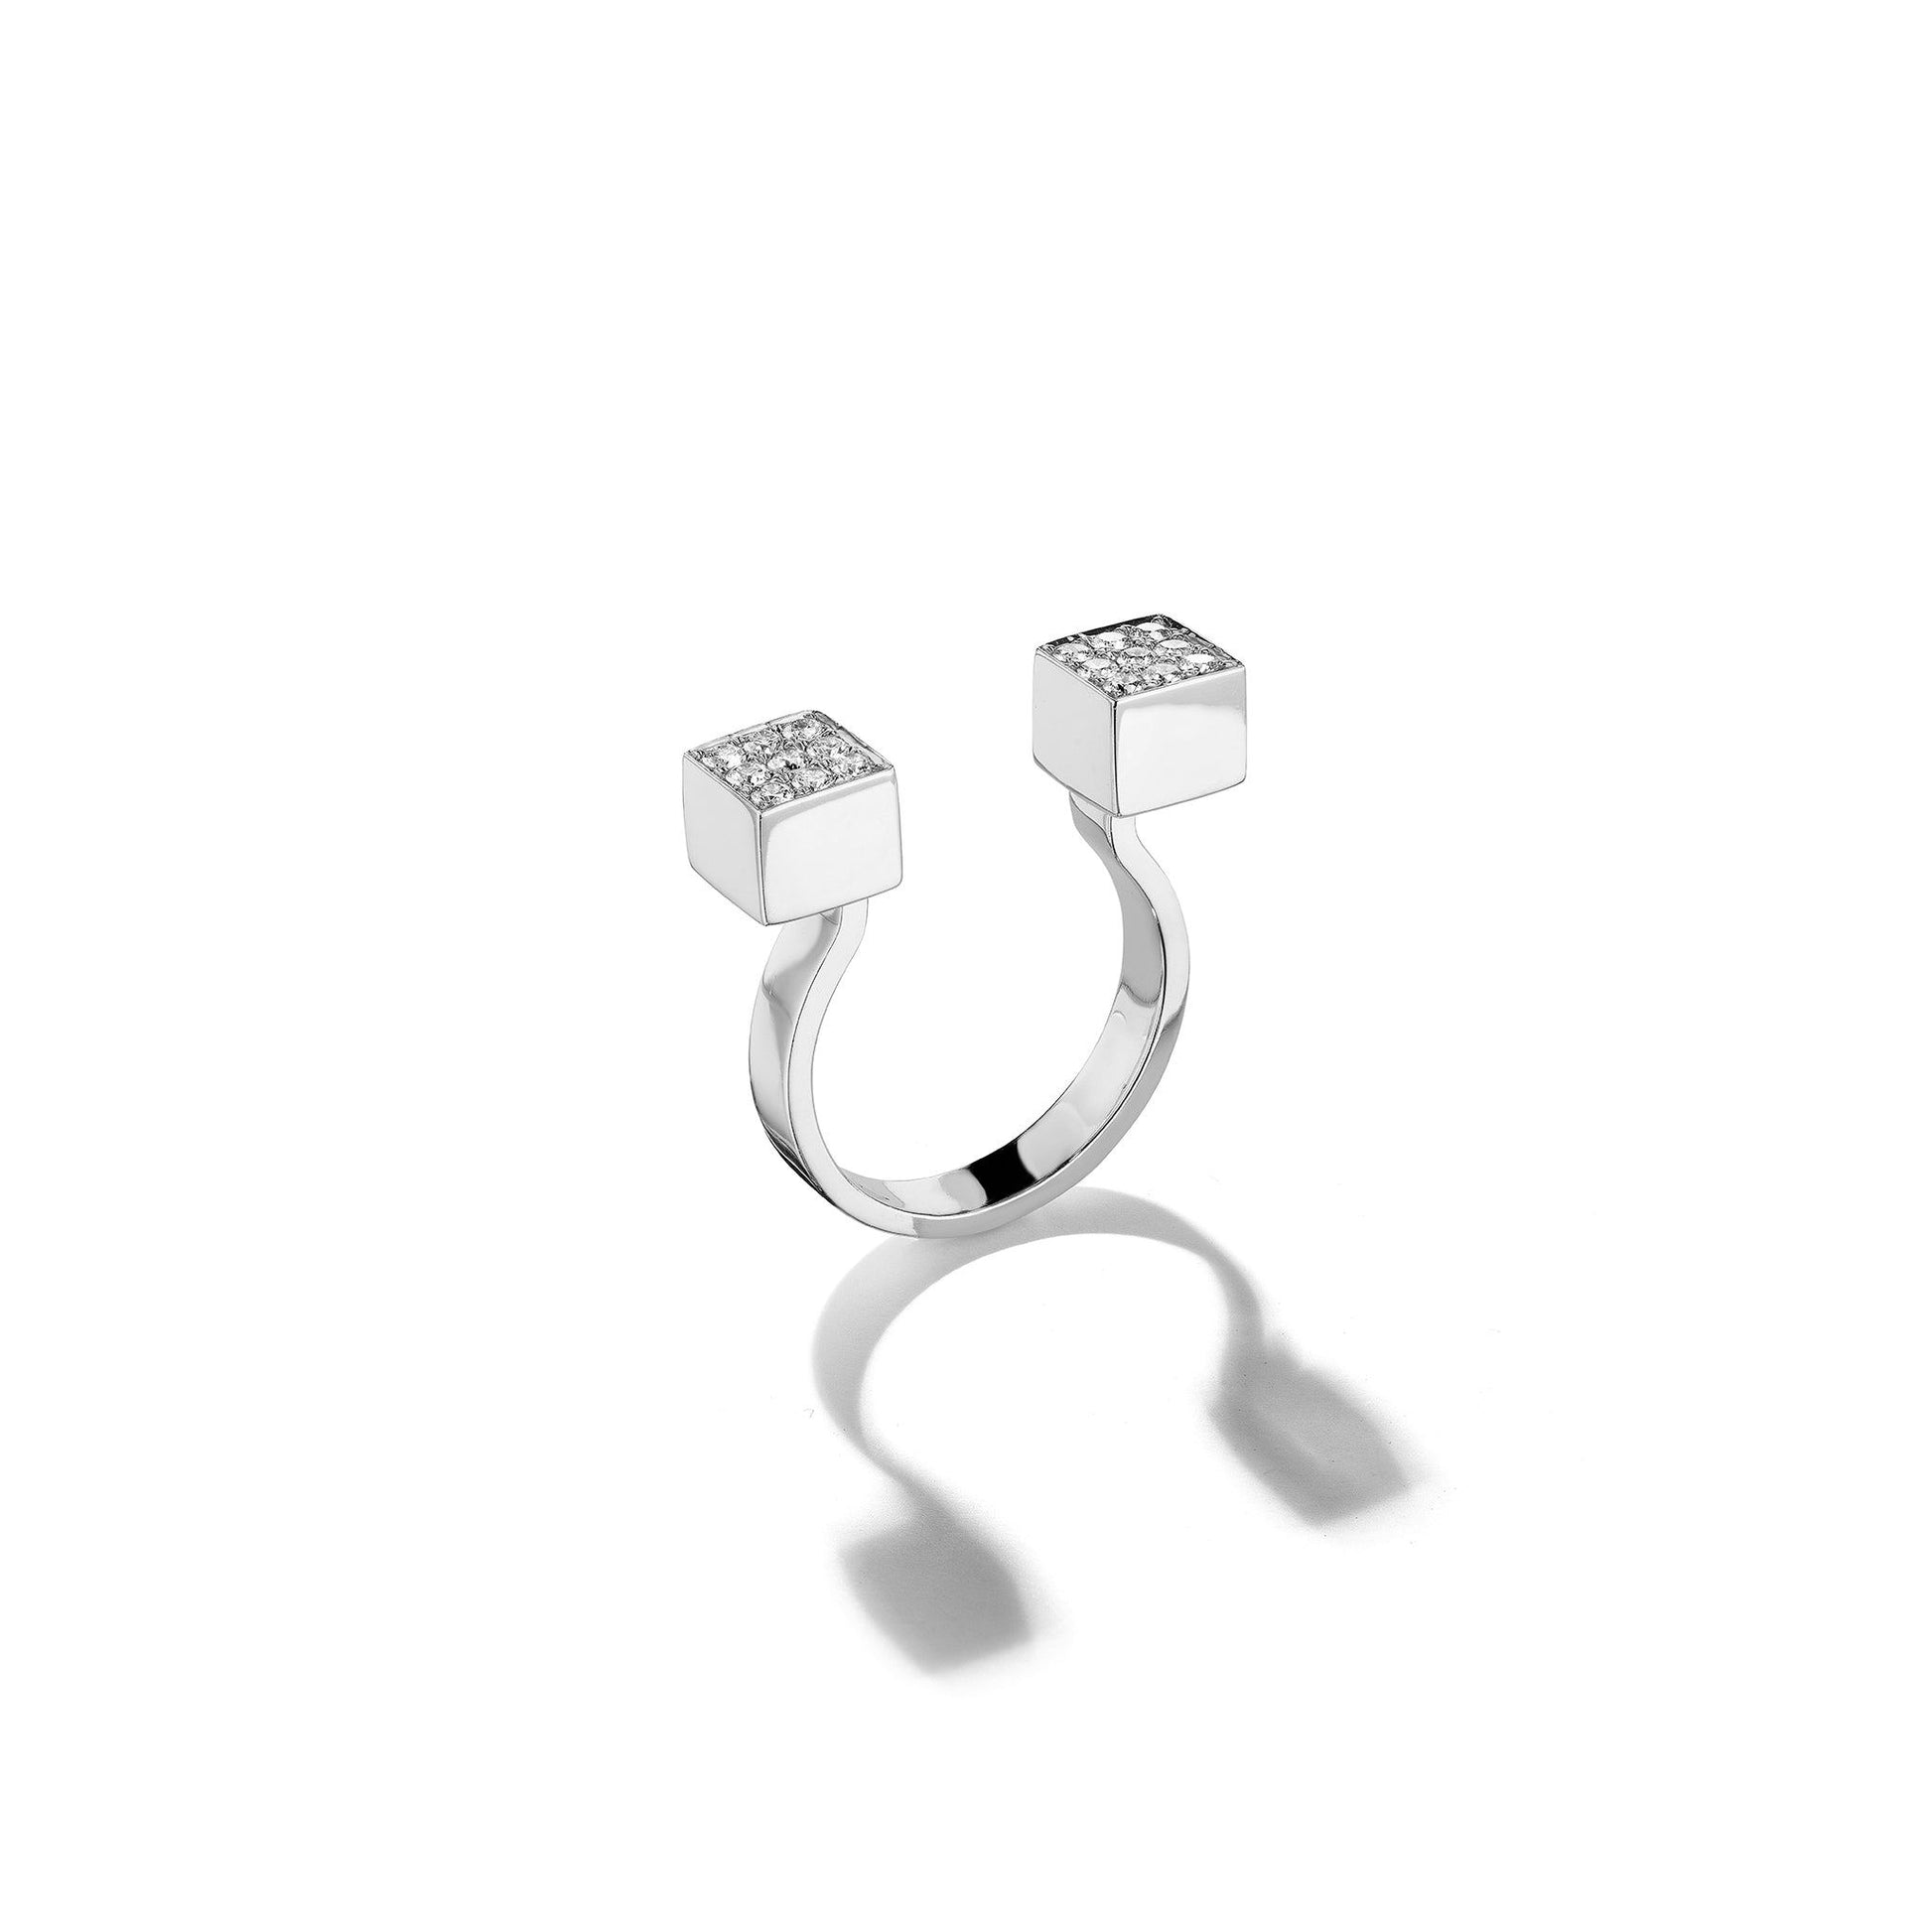 Mimi So Piece In-Between Square Diamond Ring_18k White Gold